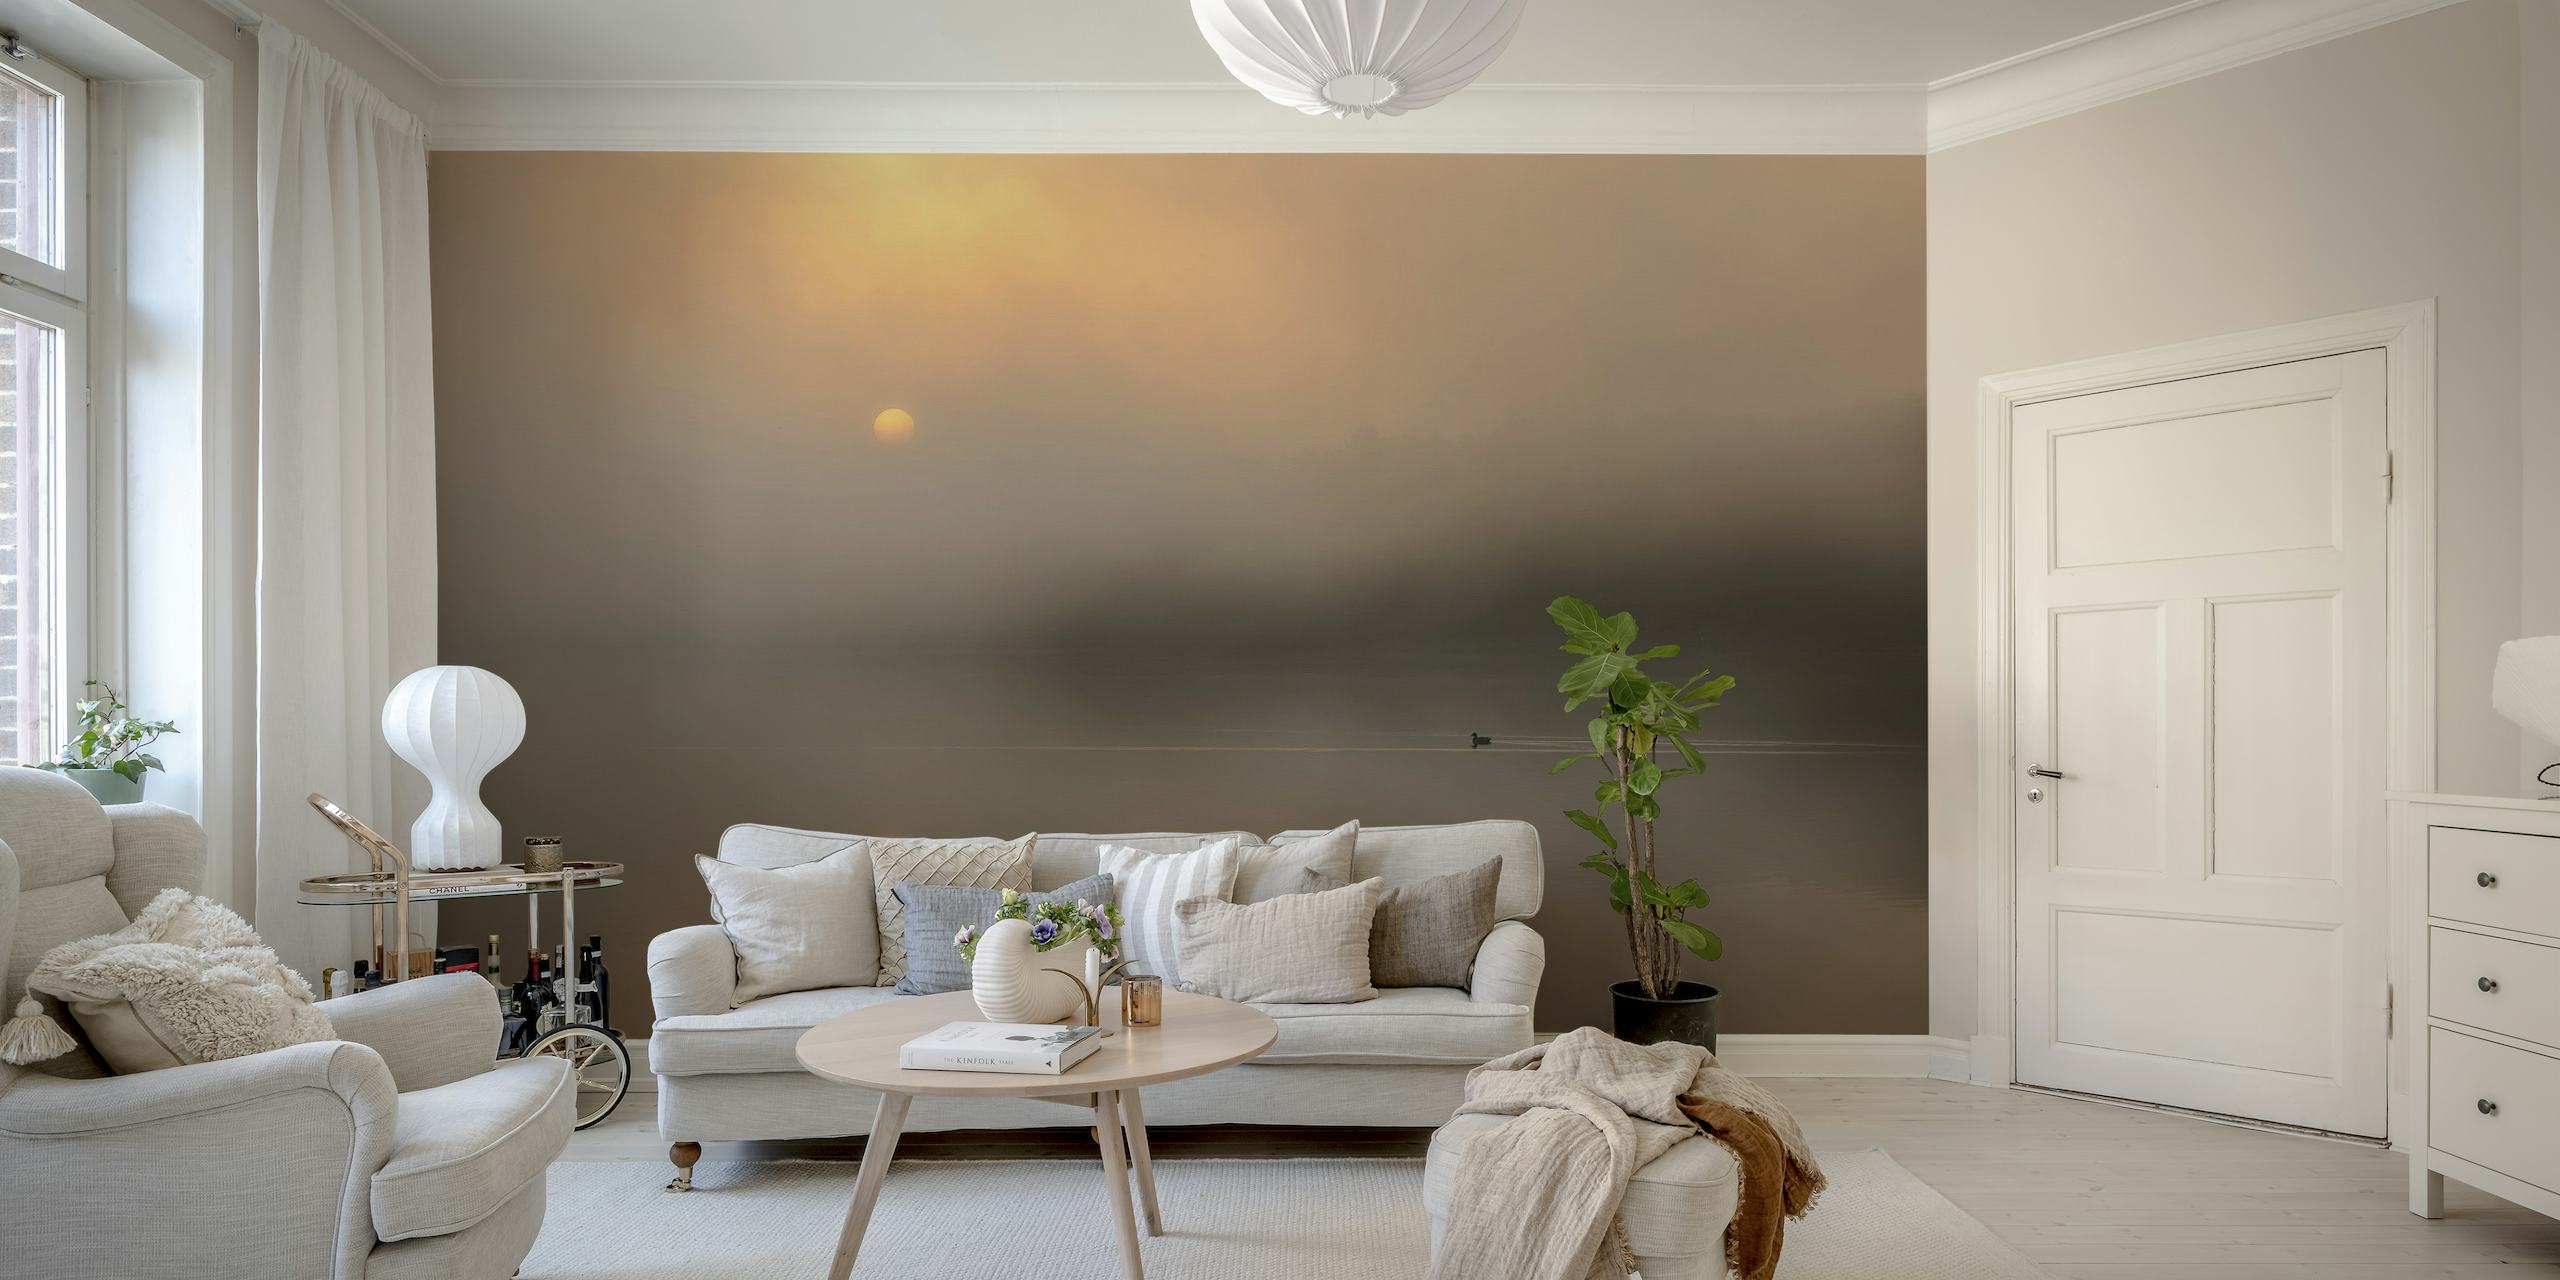 Wall mural featuring a scenic sunrise over water with a solitary figure running in the distance